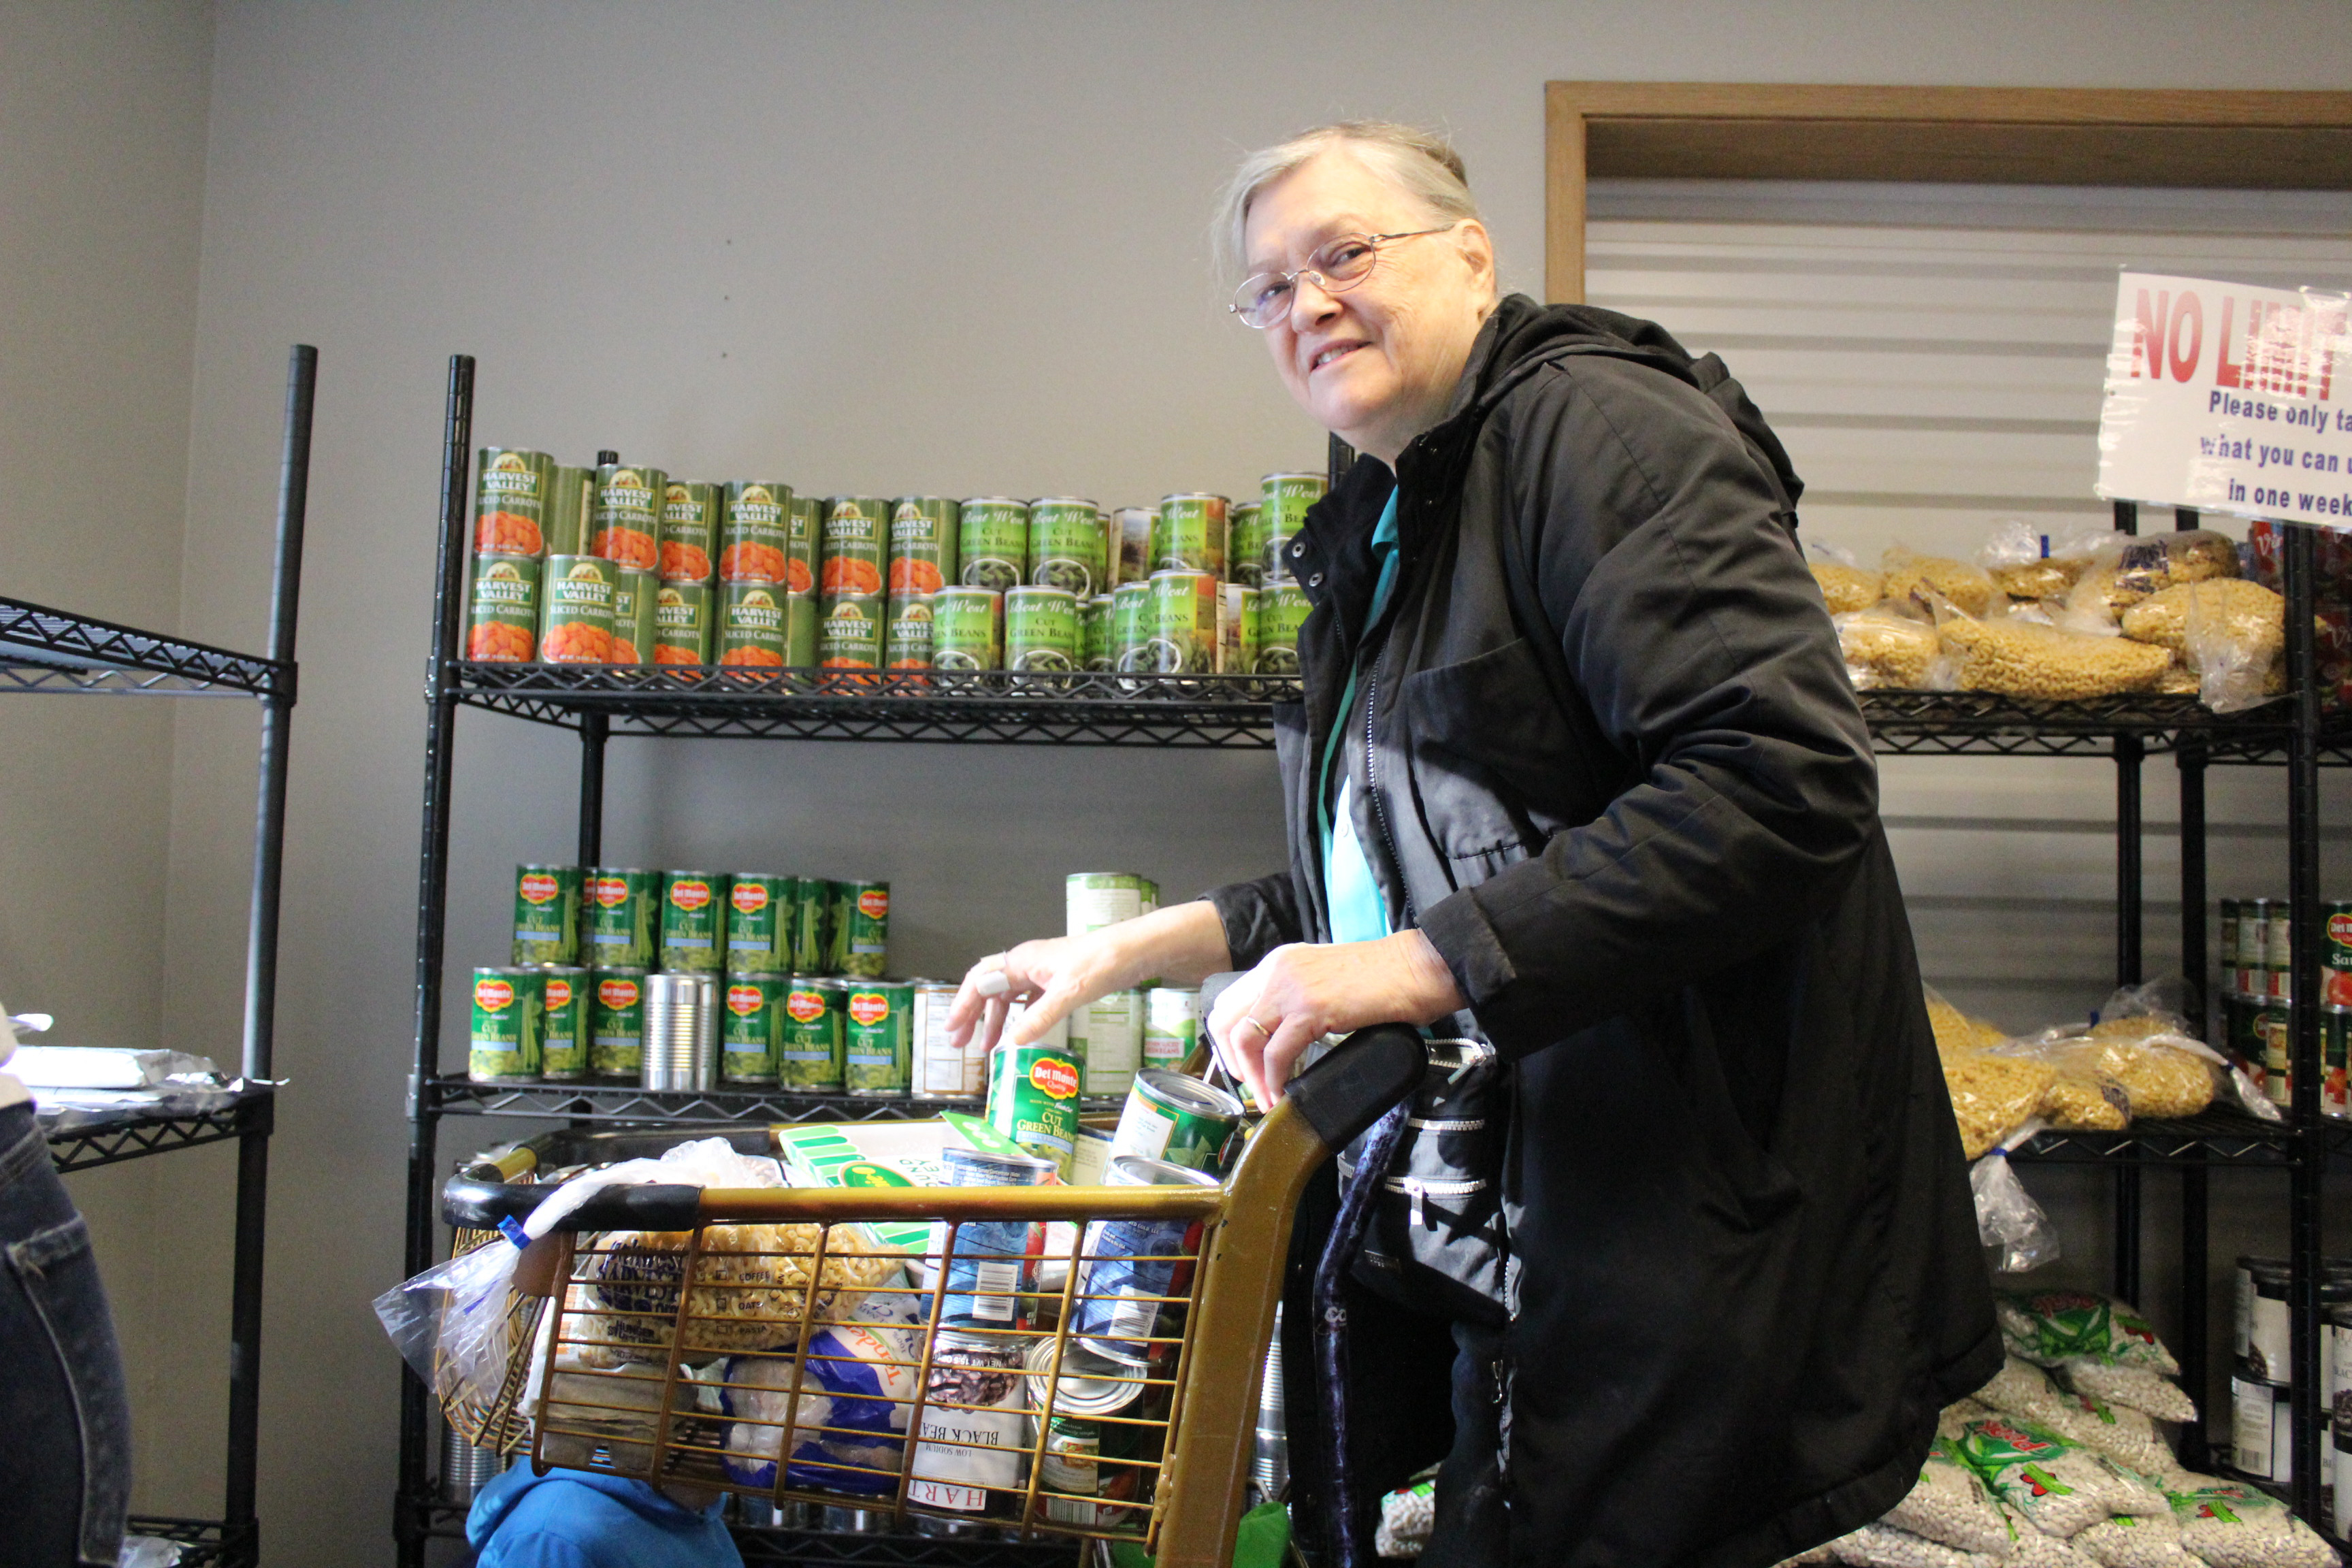 Grandma shops at local food bank. She smiles at the camera as she places canned vegetables in her cart.